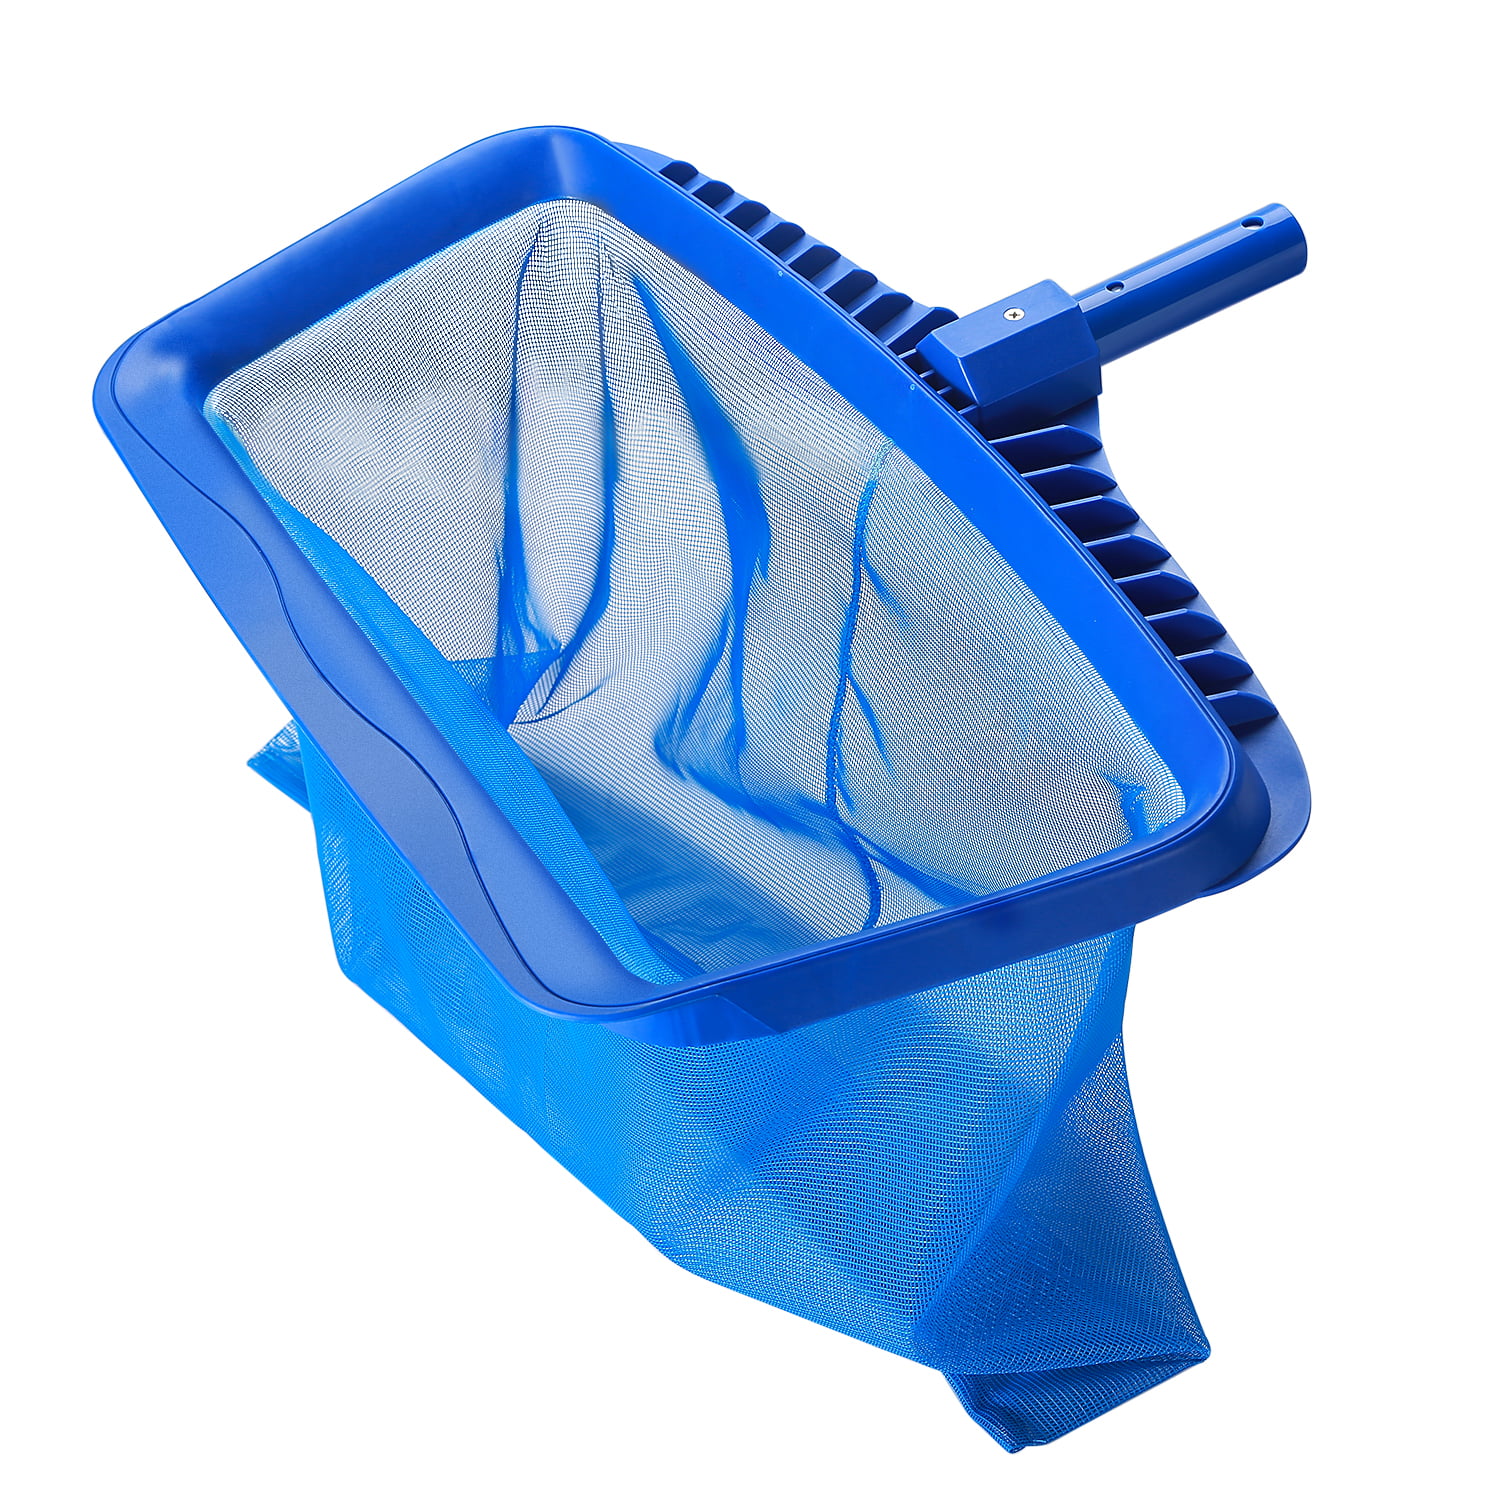 Professional Swimming Pool Leaf Cleaning Shallow Net Swimming Pool Spa Pond Leaves Cleaning Tool Deep Ultra Fine Mesh Netting Bag Basket for Fast Cleaning of The Finest Debris